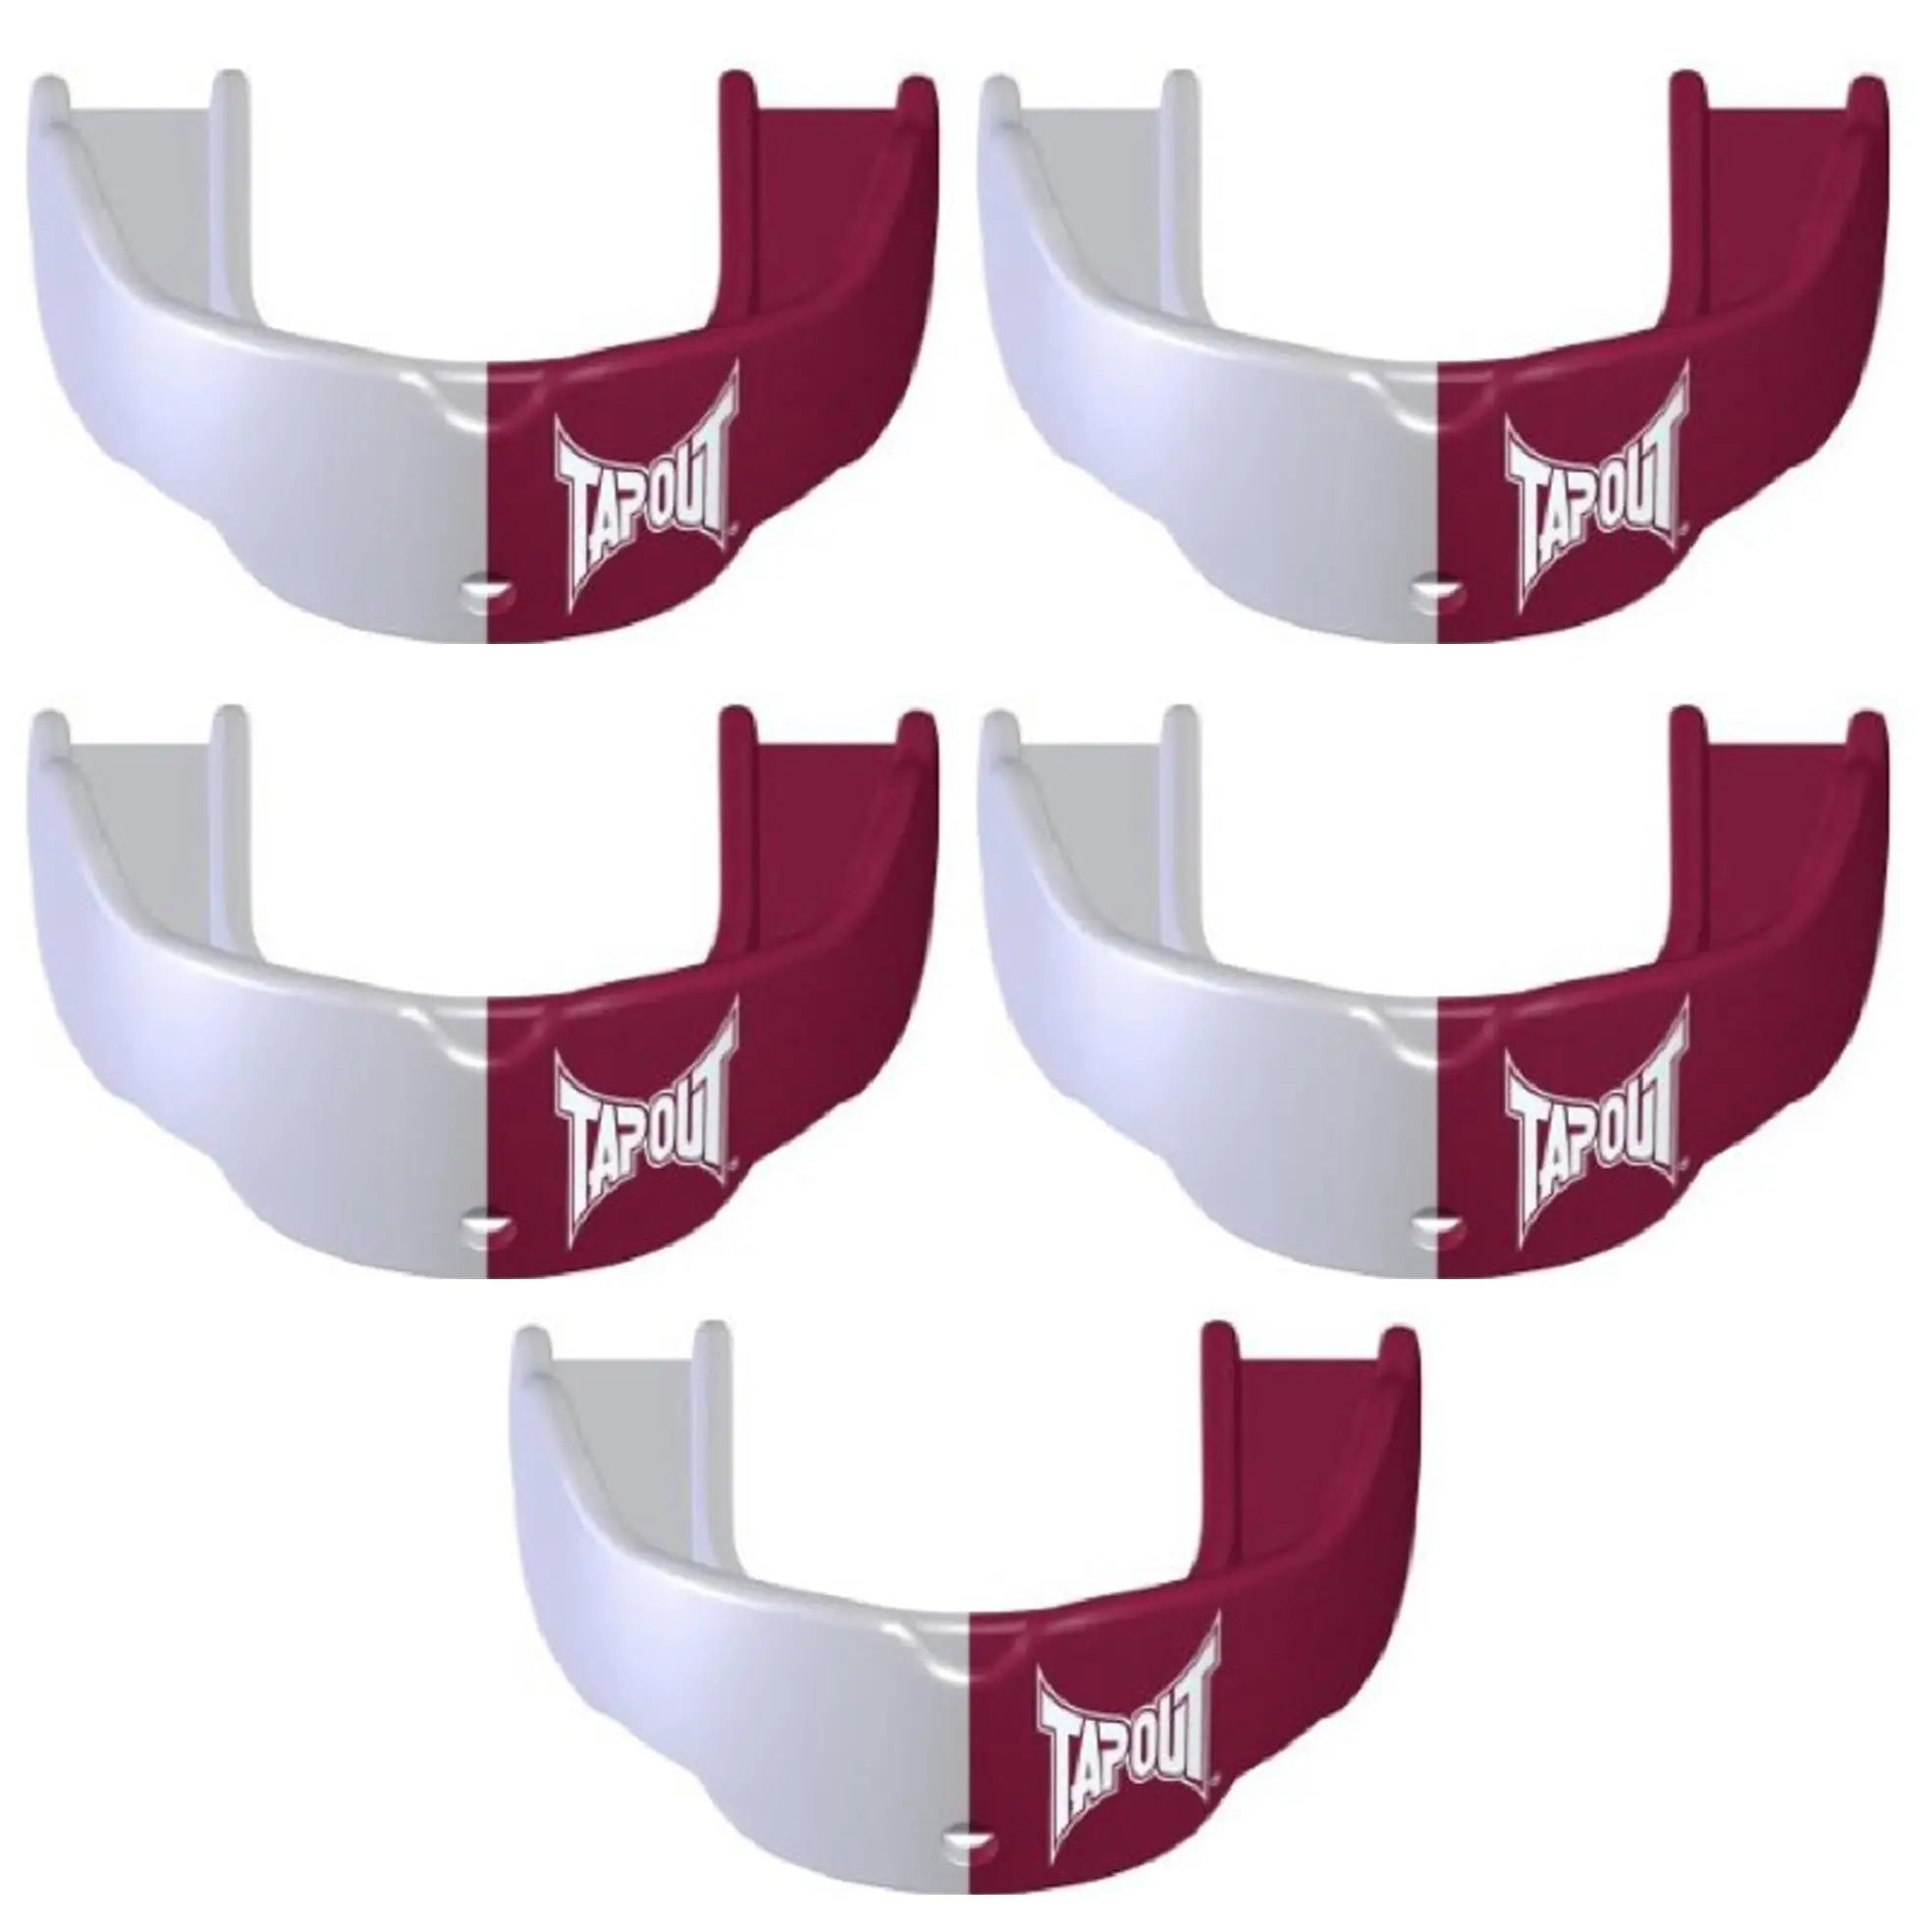 Tapout Adult Protective Sports Mouthguard with Strap 5-Pack - Maroon/White Tapout